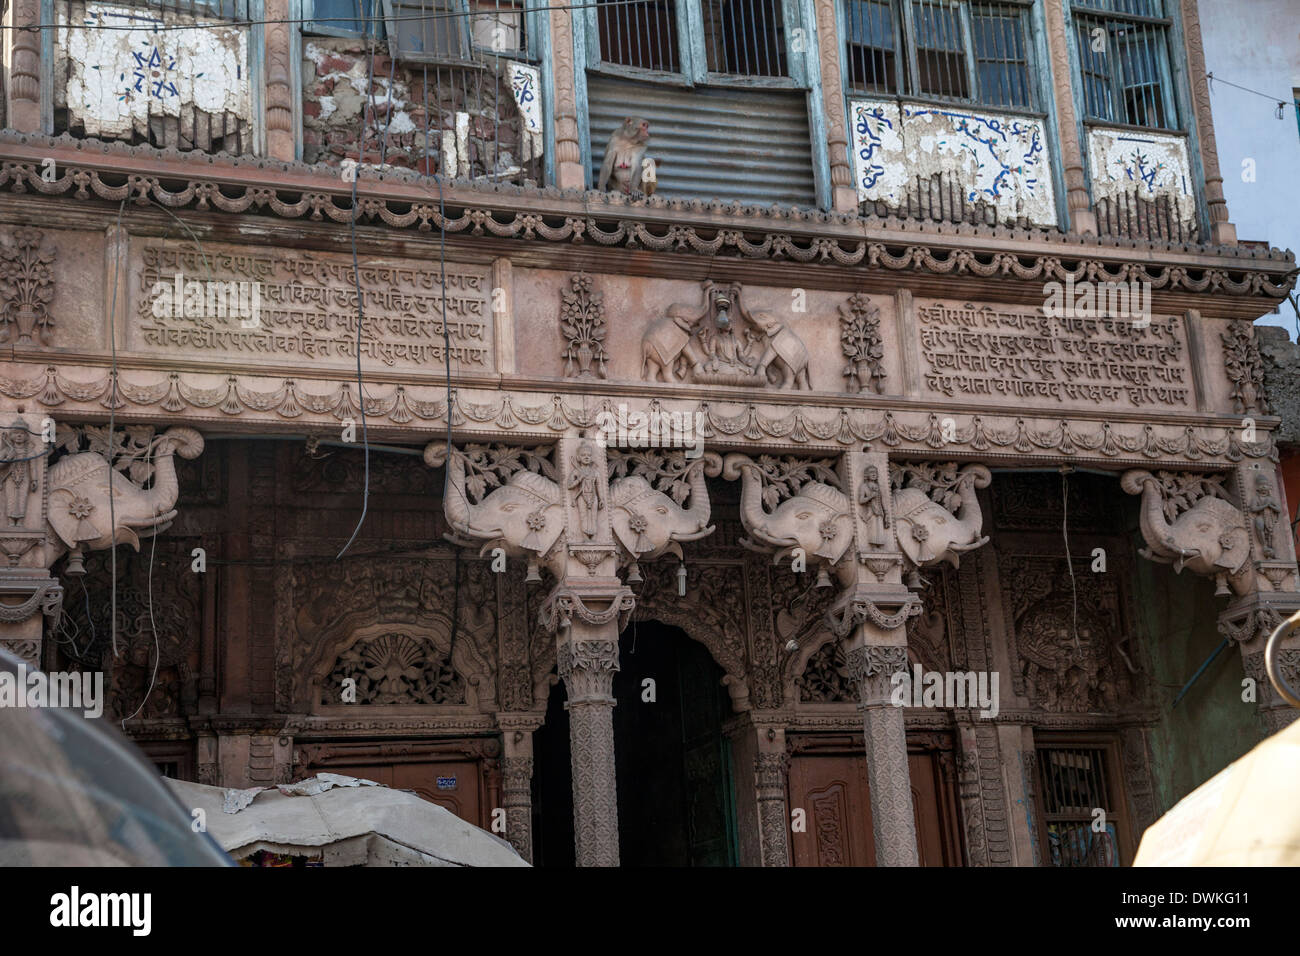 Agra, India. South Asian Architectural Motifs. Elephant Heads Top Columns Supporting Upper level. Note Monkey on Ledge. Stock Photo